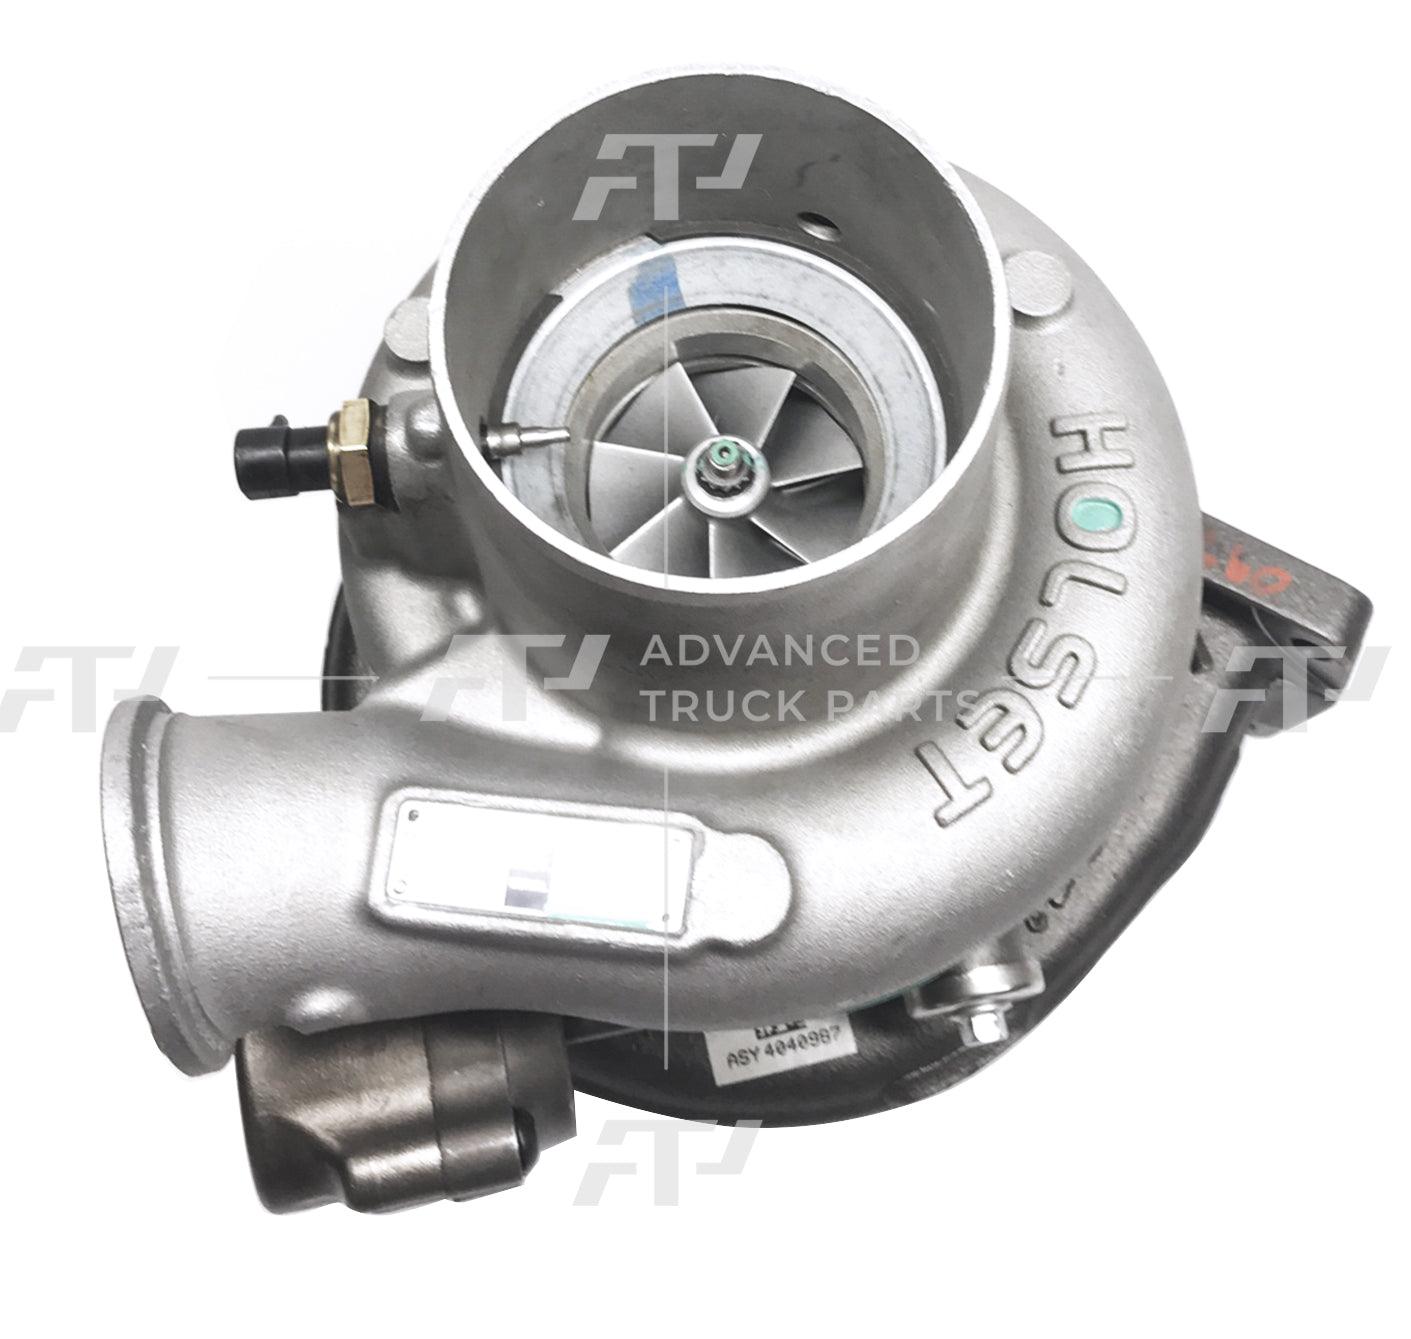 4090053Rx Genuine Cummins Turbocharger With Actuator For Isl - ADVANCED TRUCK PARTS